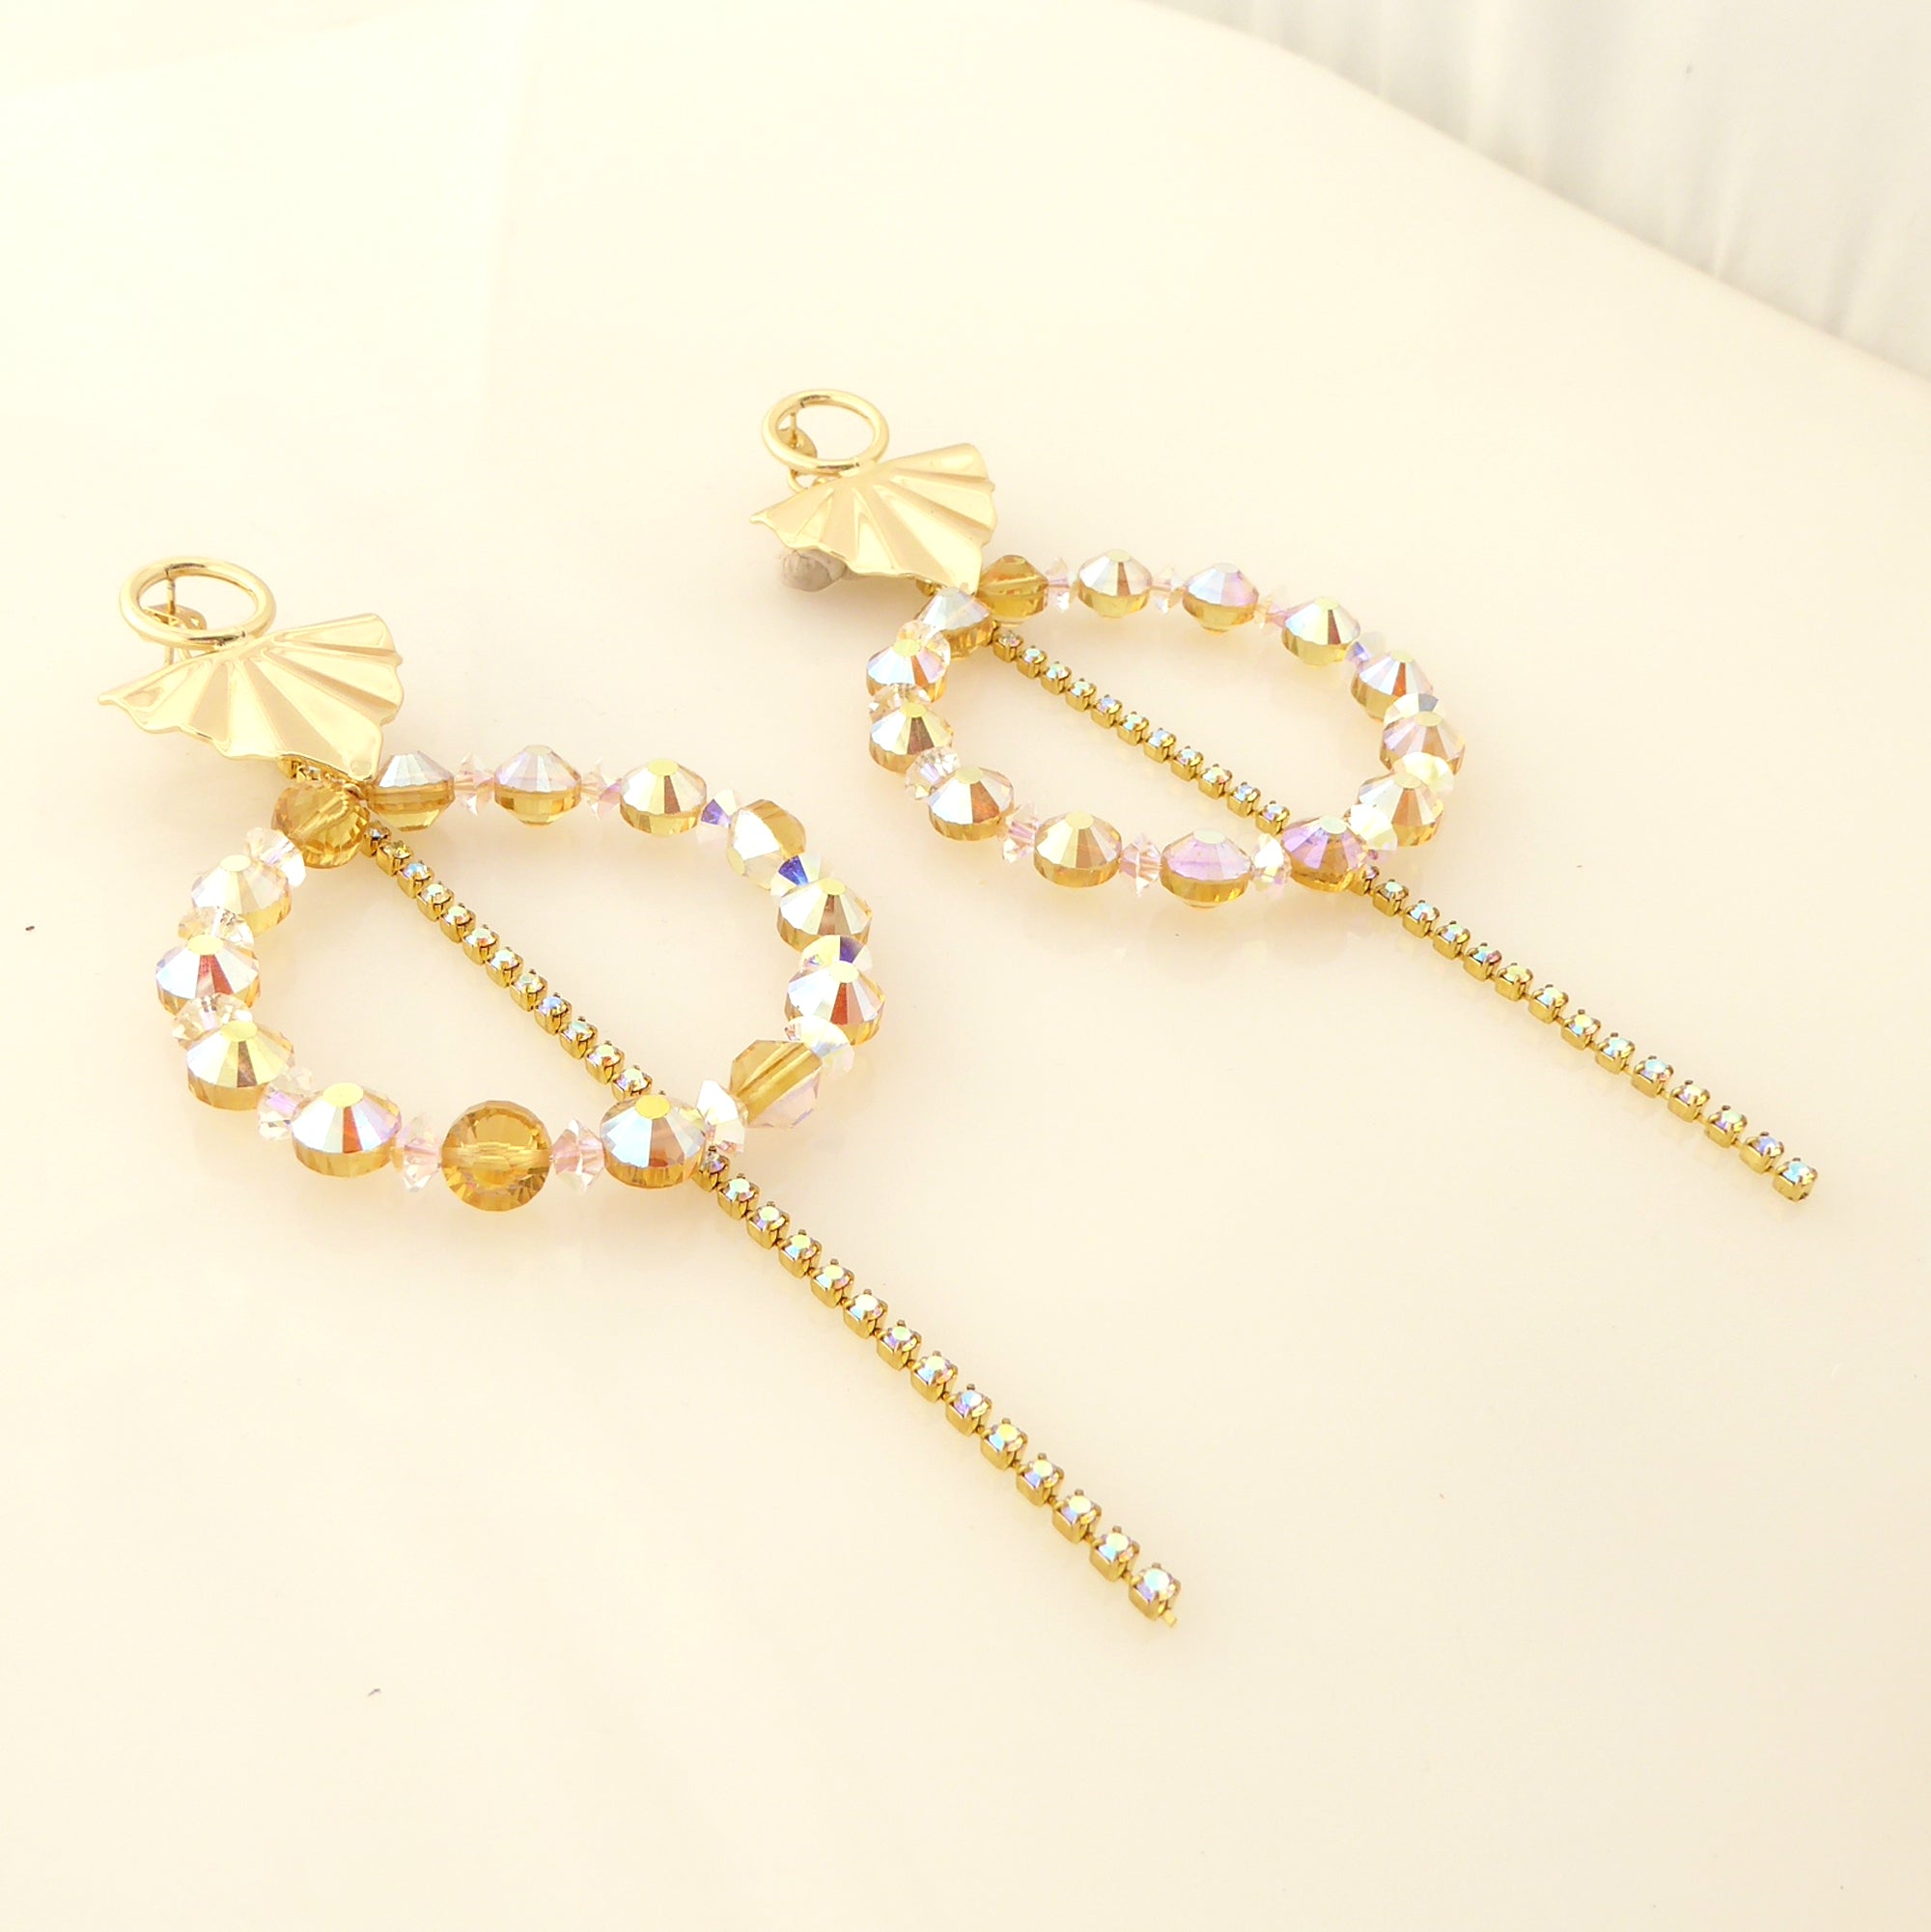 Iridescent yellow crystal earrings by Jenny Dayco 2